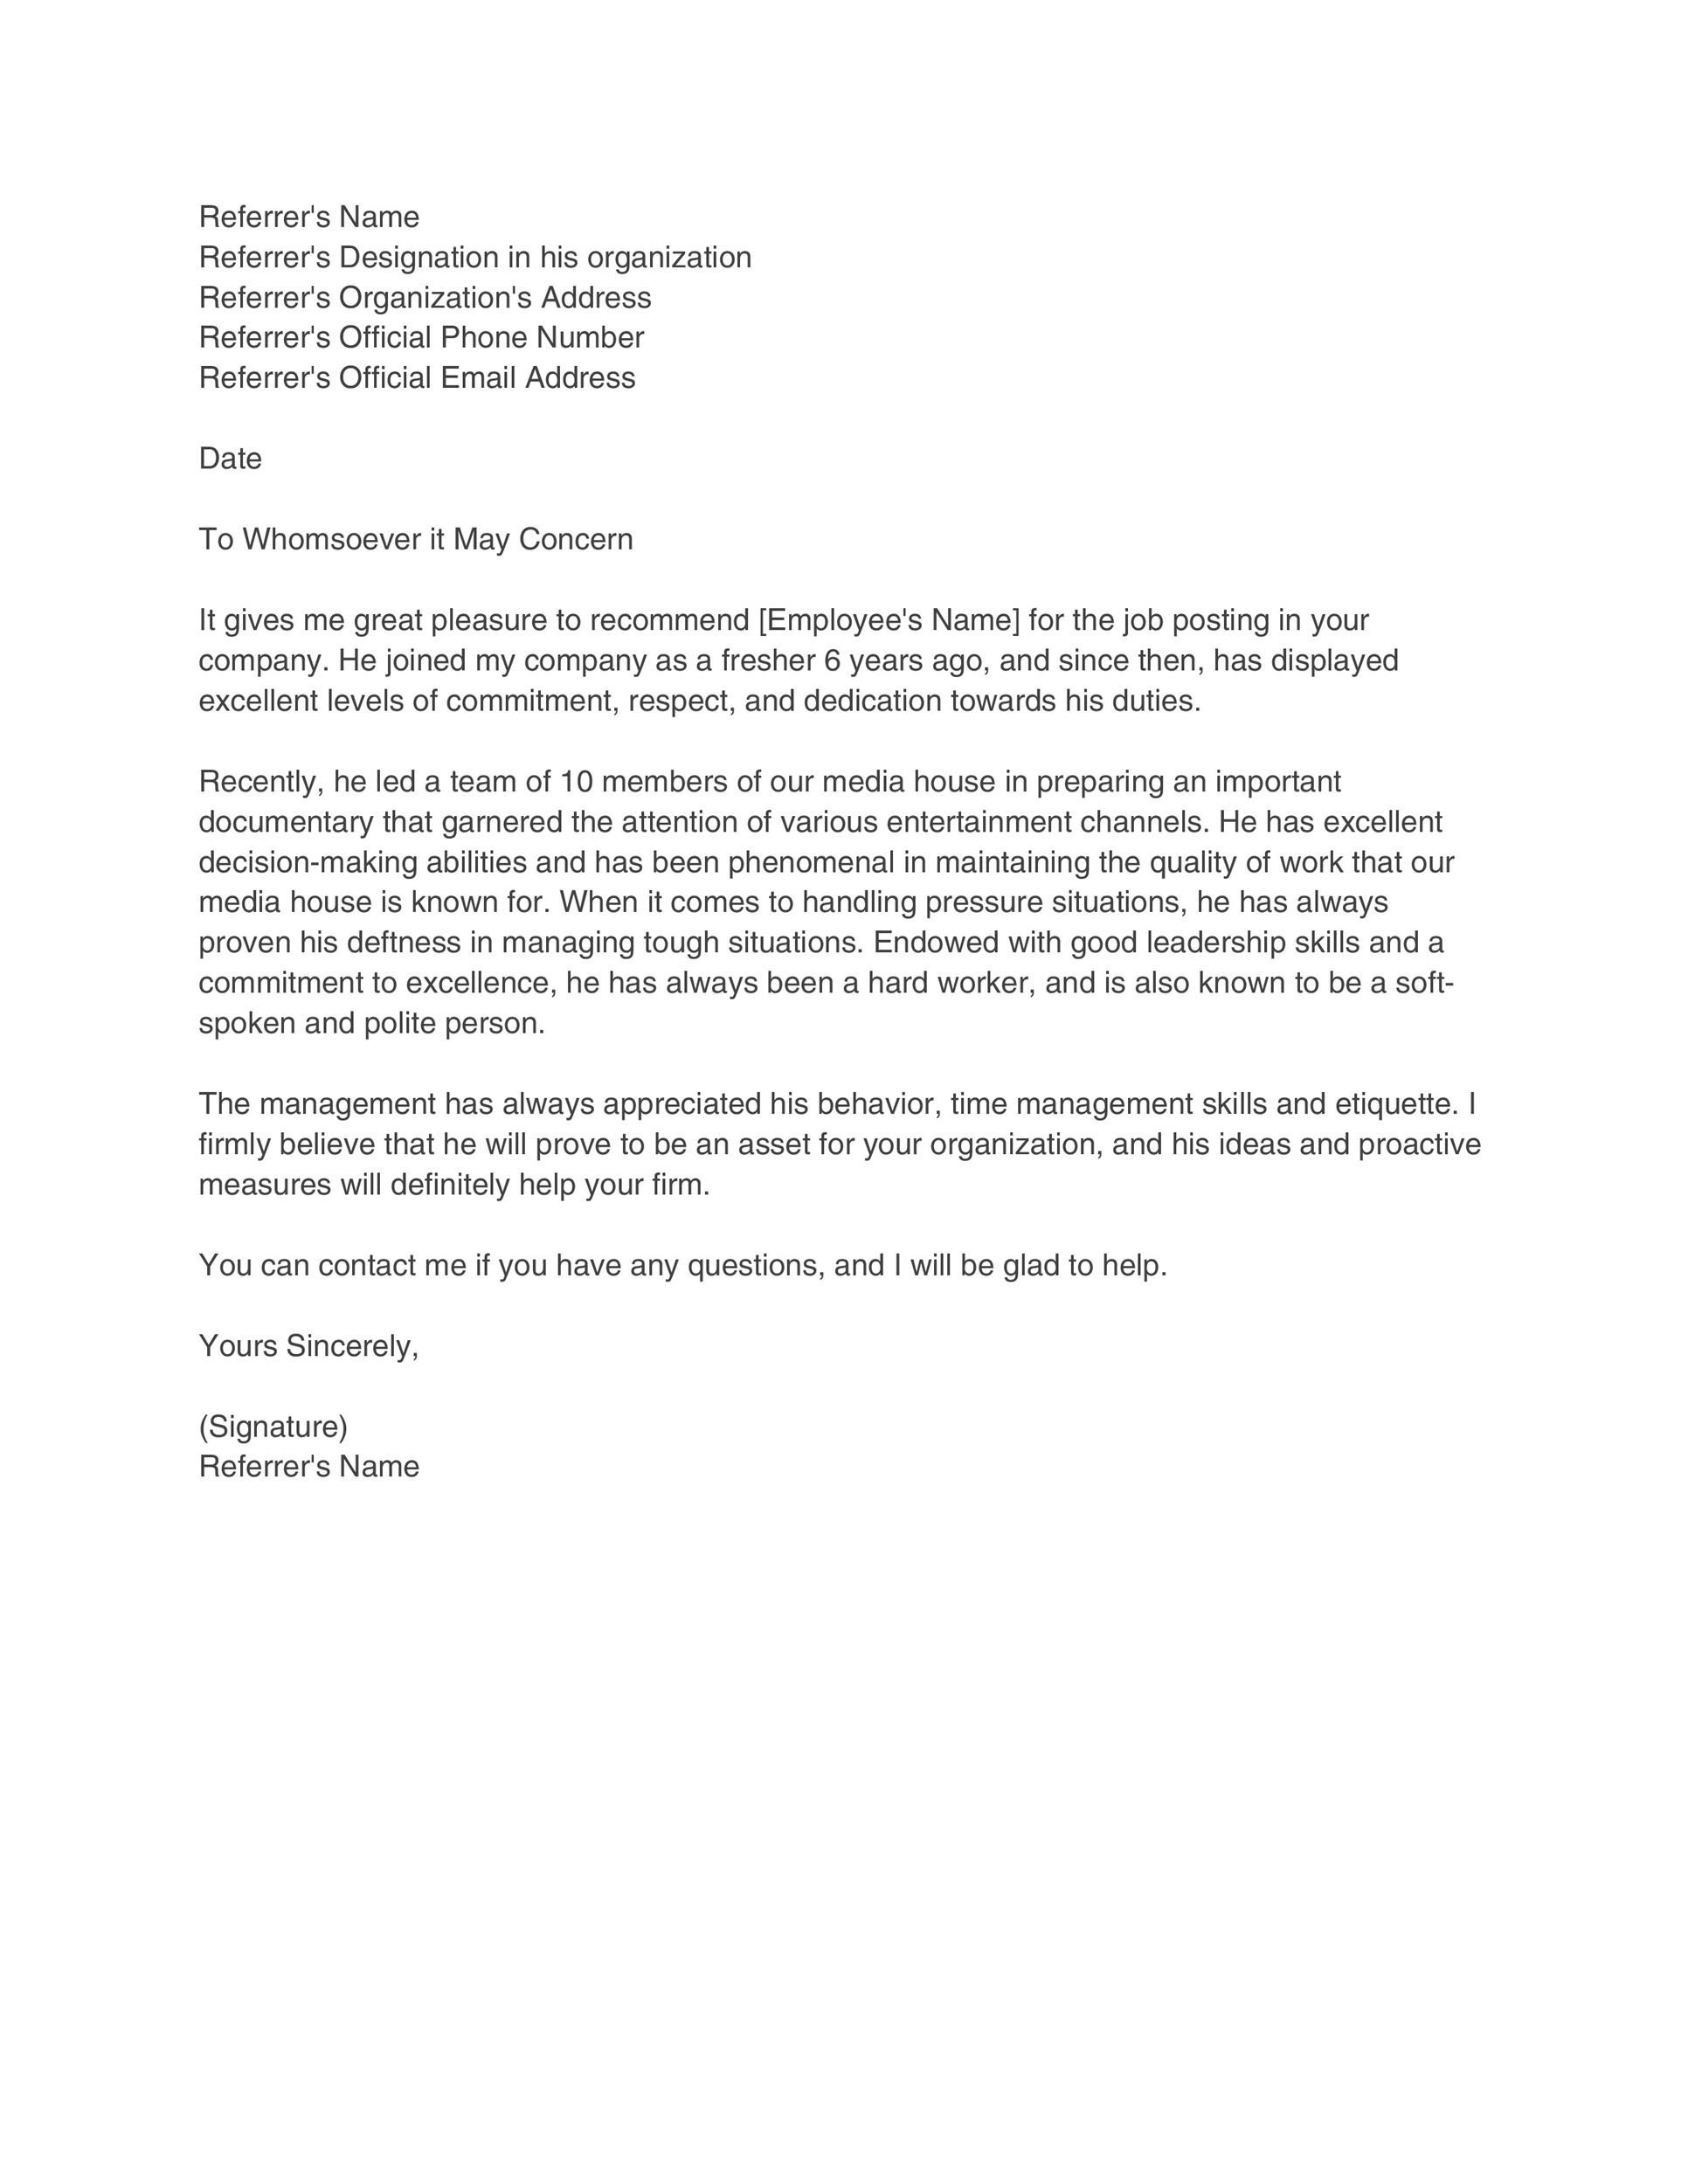 Personal Recommendation Letter For Employment from templatelab.com